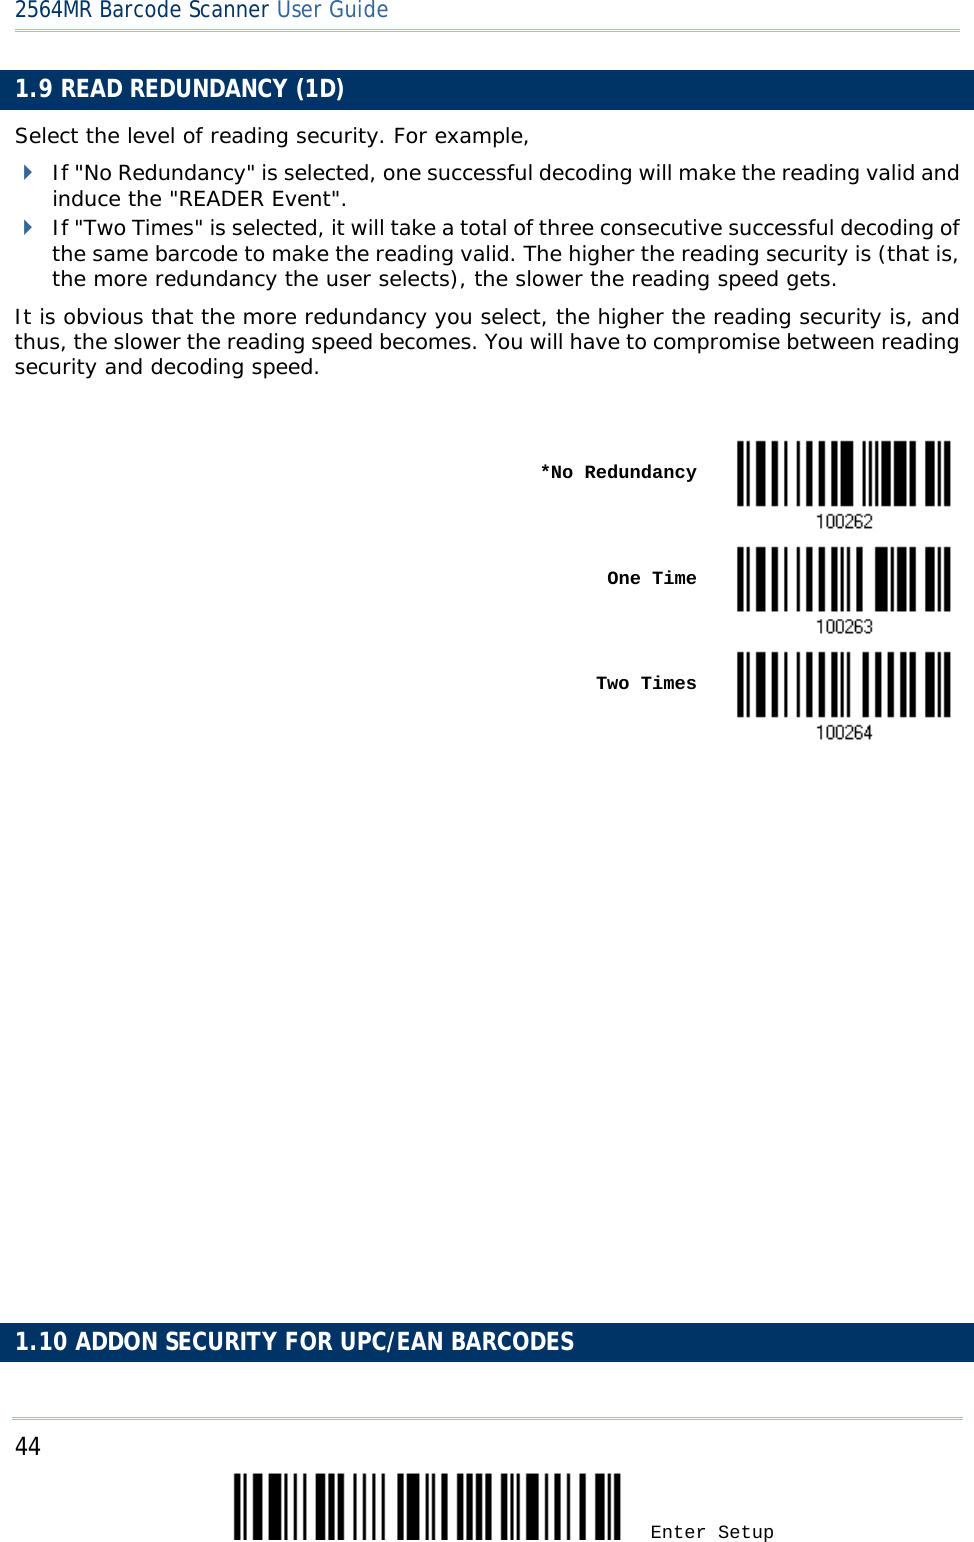 2564MR Barcode Scanner User Guide  1.9 READ REDUNDANCY (1D) Select the level of reading security. For example,  If &quot;No Redundancy&quot; is selected, one successful decoding will make the reading valid and induce the &quot;READER Event&quot;.  If &quot;Two Times&quot; is selected, it will take a total of three consecutive successful decoding of the same barcode to make the reading valid. The higher the reading security is (that is, the more redundancy the user selects), the slower the reading speed gets.  It is obvious that the more redundancy you select, the higher the reading security is, and thus, the slower the reading speed becomes. You will have to compromise between reading security and decoding speed.     *No Redundancy     One Time     Two Times                            1.10 ADDON SECURITY FOR UPC/EAN BARCODES 44 Enter Setup 